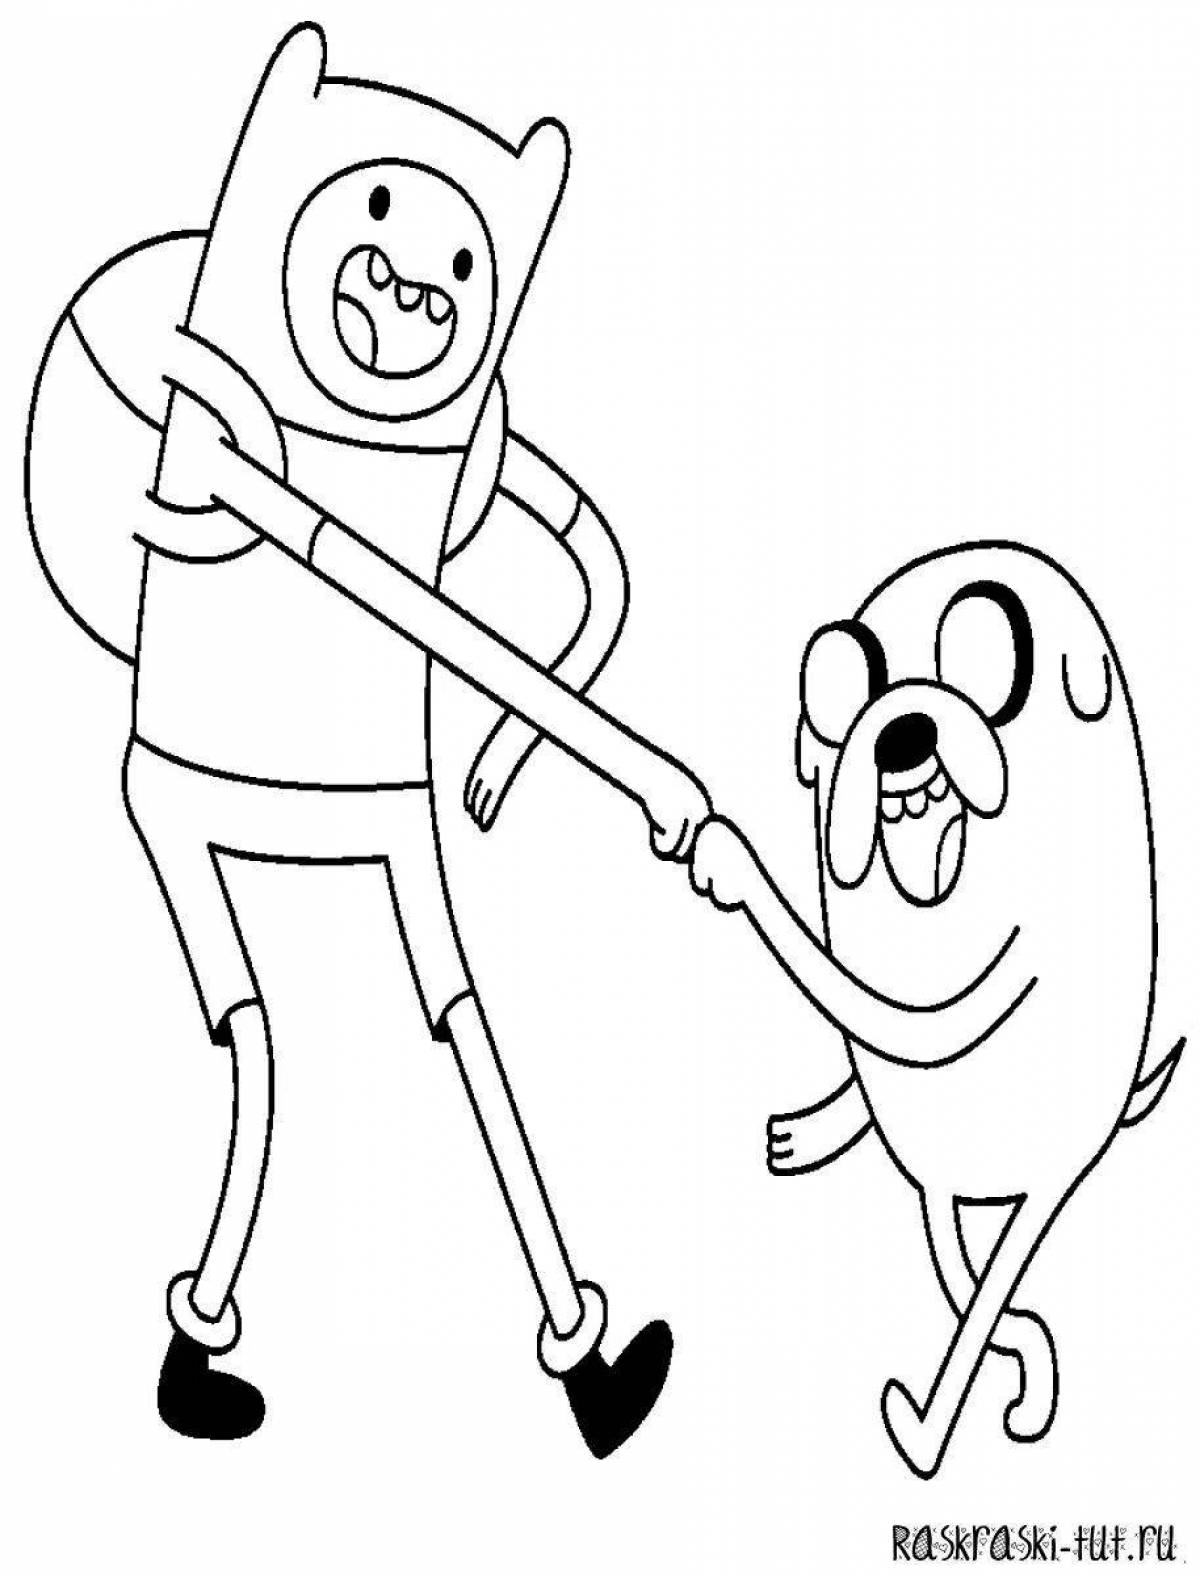 Colorful fin and jake from adventure time